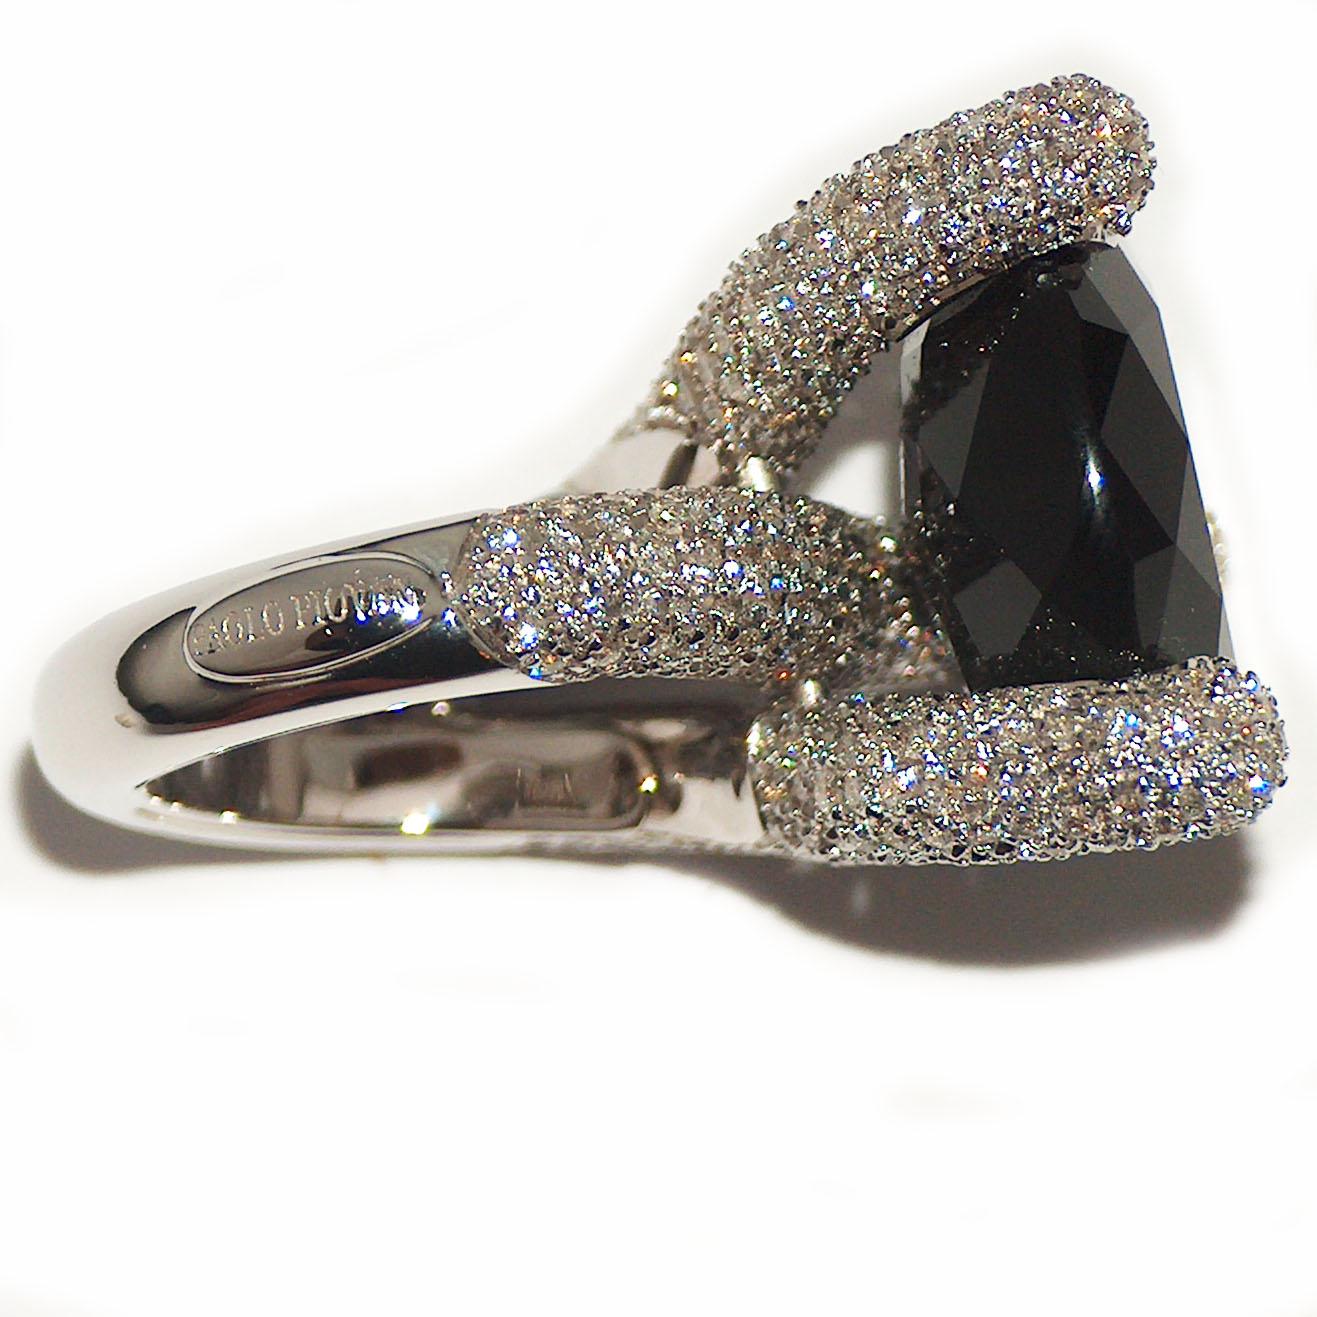 Paolo Piovan Diamonds and Onyx Ring in white gold For Sale 1